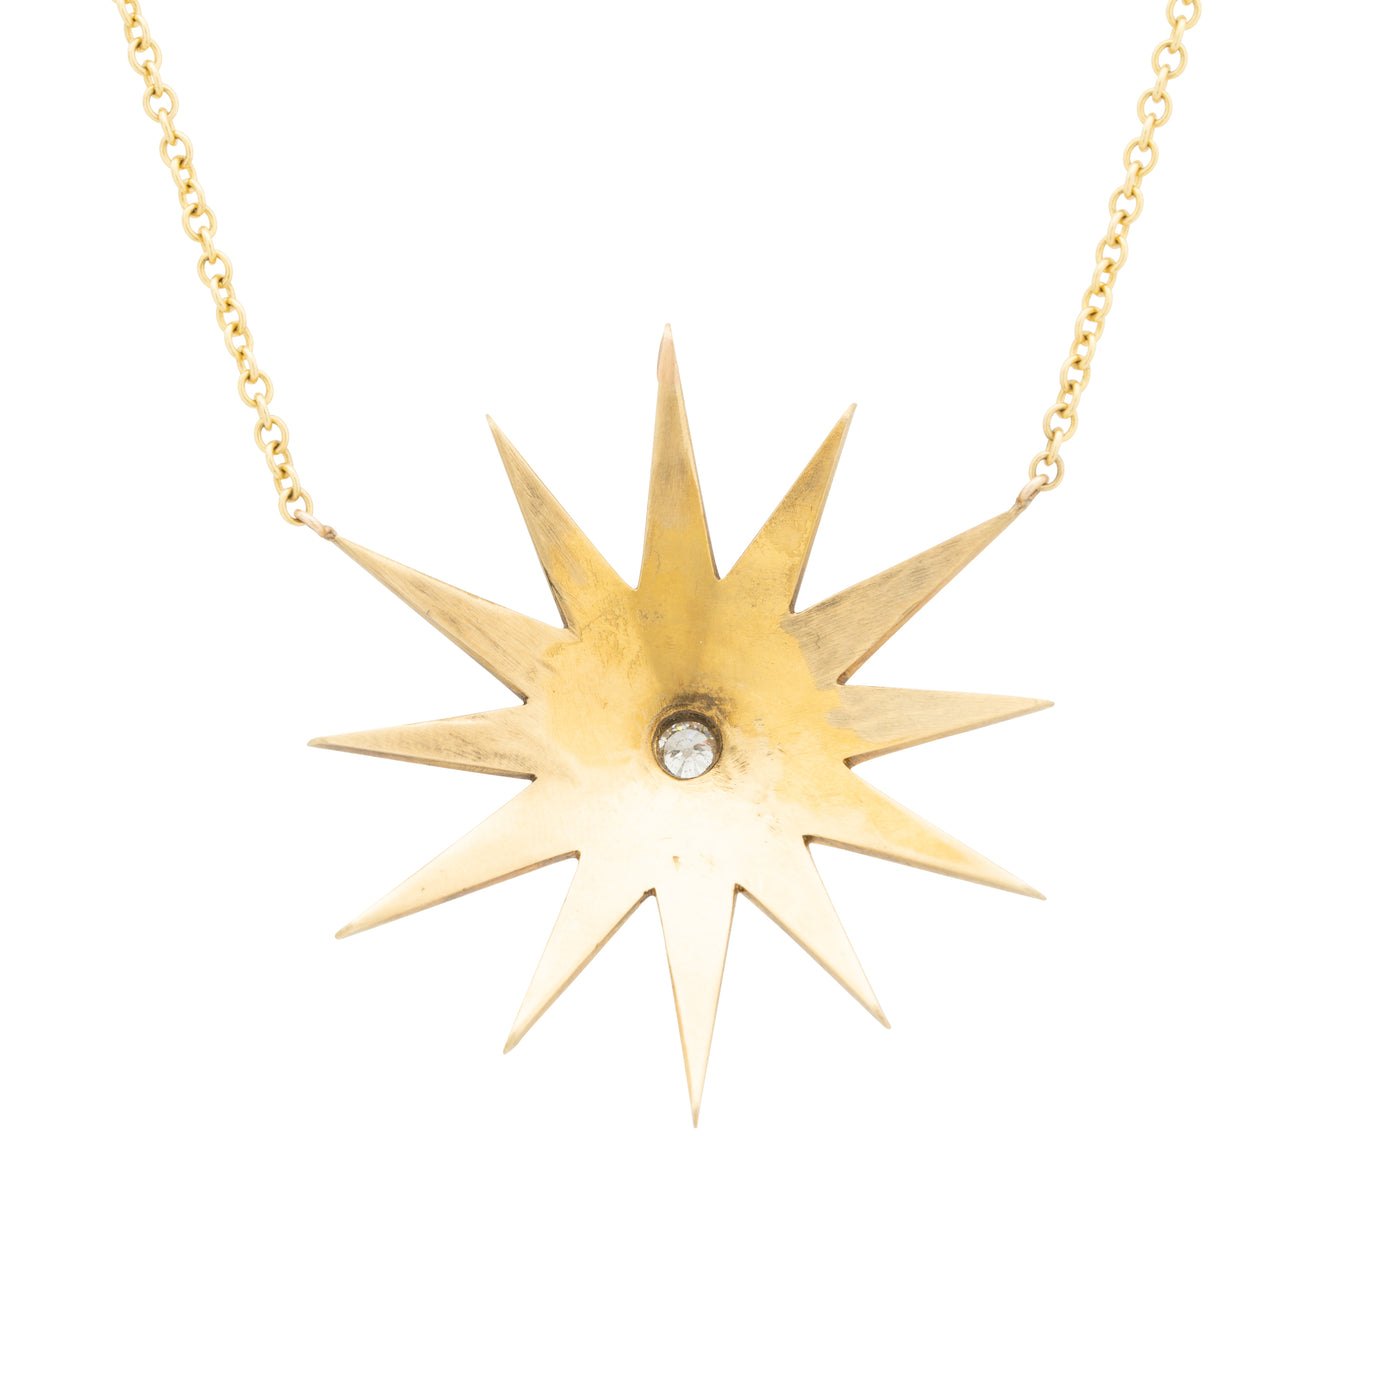 VICTORIAN 18K YELLOW GOLD, DIAMOND AND NATURAL PEARL STARBURST NECKLACE c.1880s